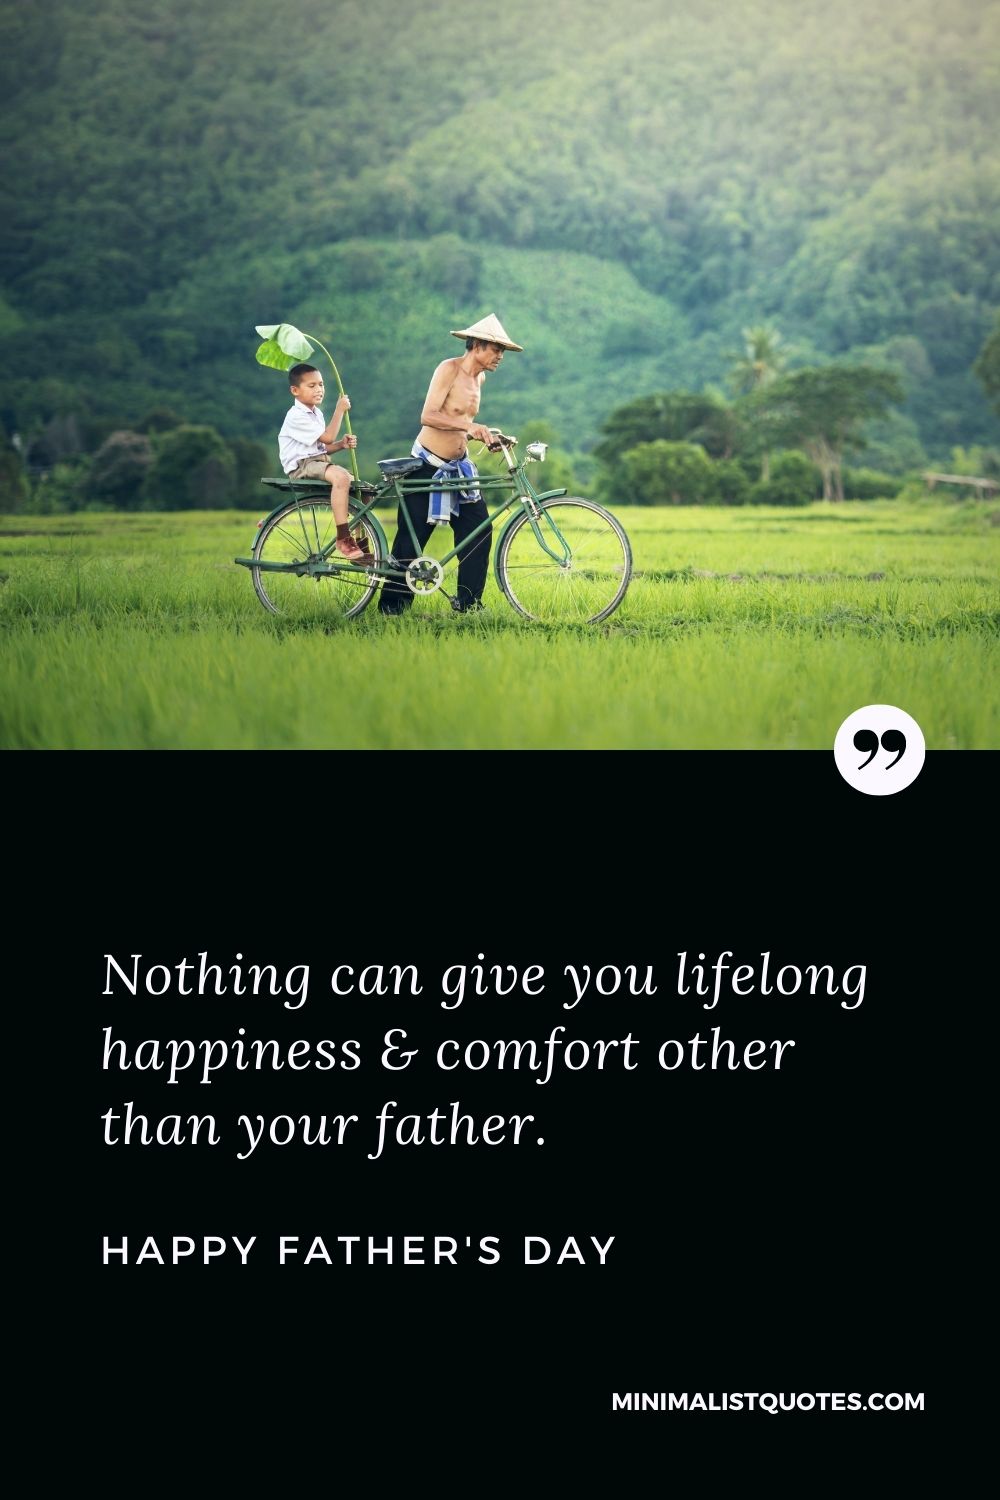 Father's Day Wish & Message With Image: Nothing can give you lifelong happiness & comfort other than your father. Happy Father's Day!